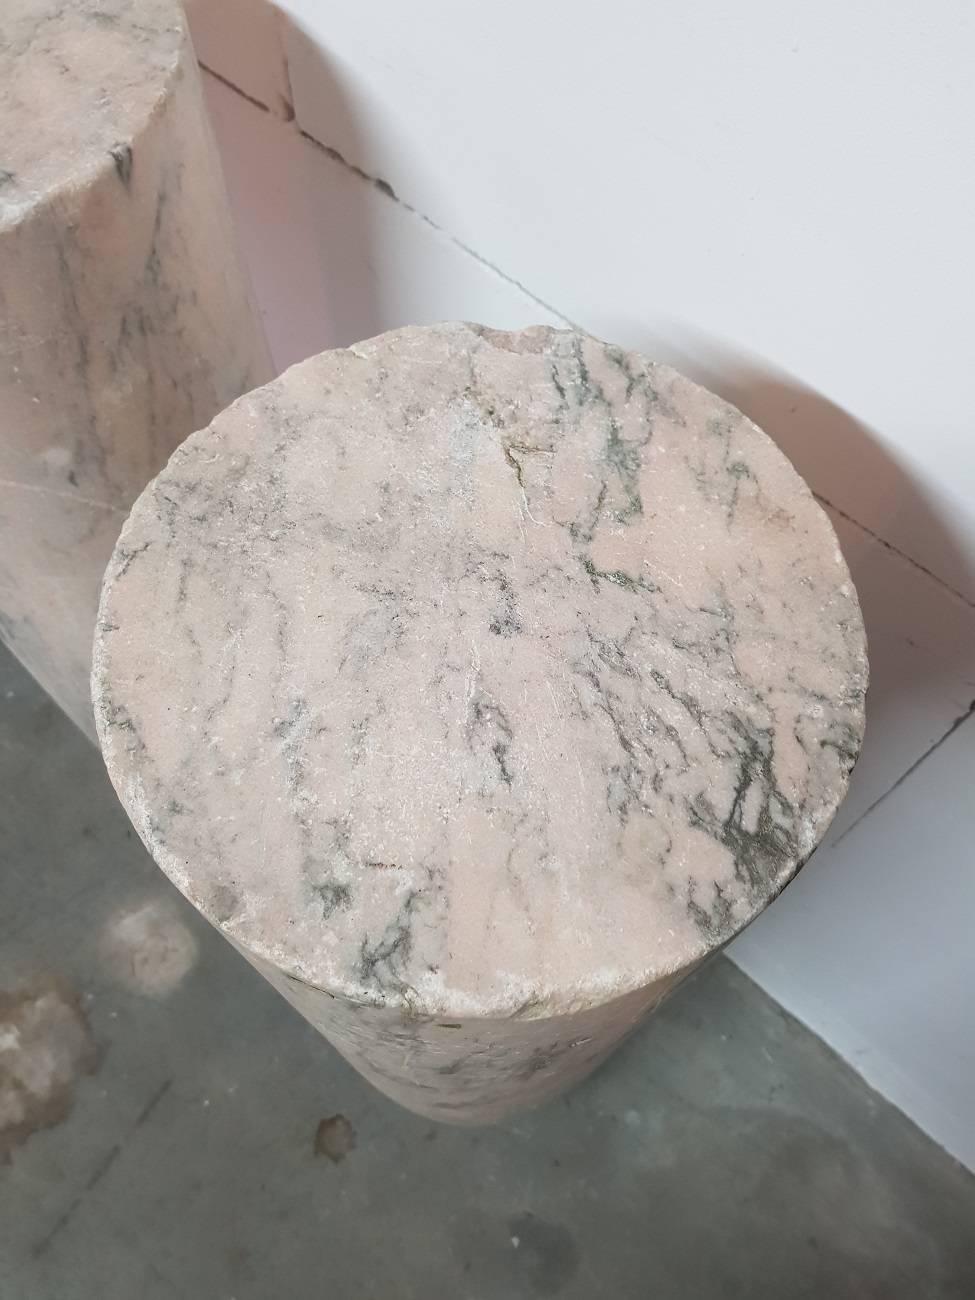 Set of two 18th century French pink marble columns/pillars with grey veins, bought from a well know antique dealer in The Hague Netherlands.
They weigh more than 150 kilo each.

The measurements are,
Depth 27.5 cm/ 10.8 inch.
Width 27.5 cm/